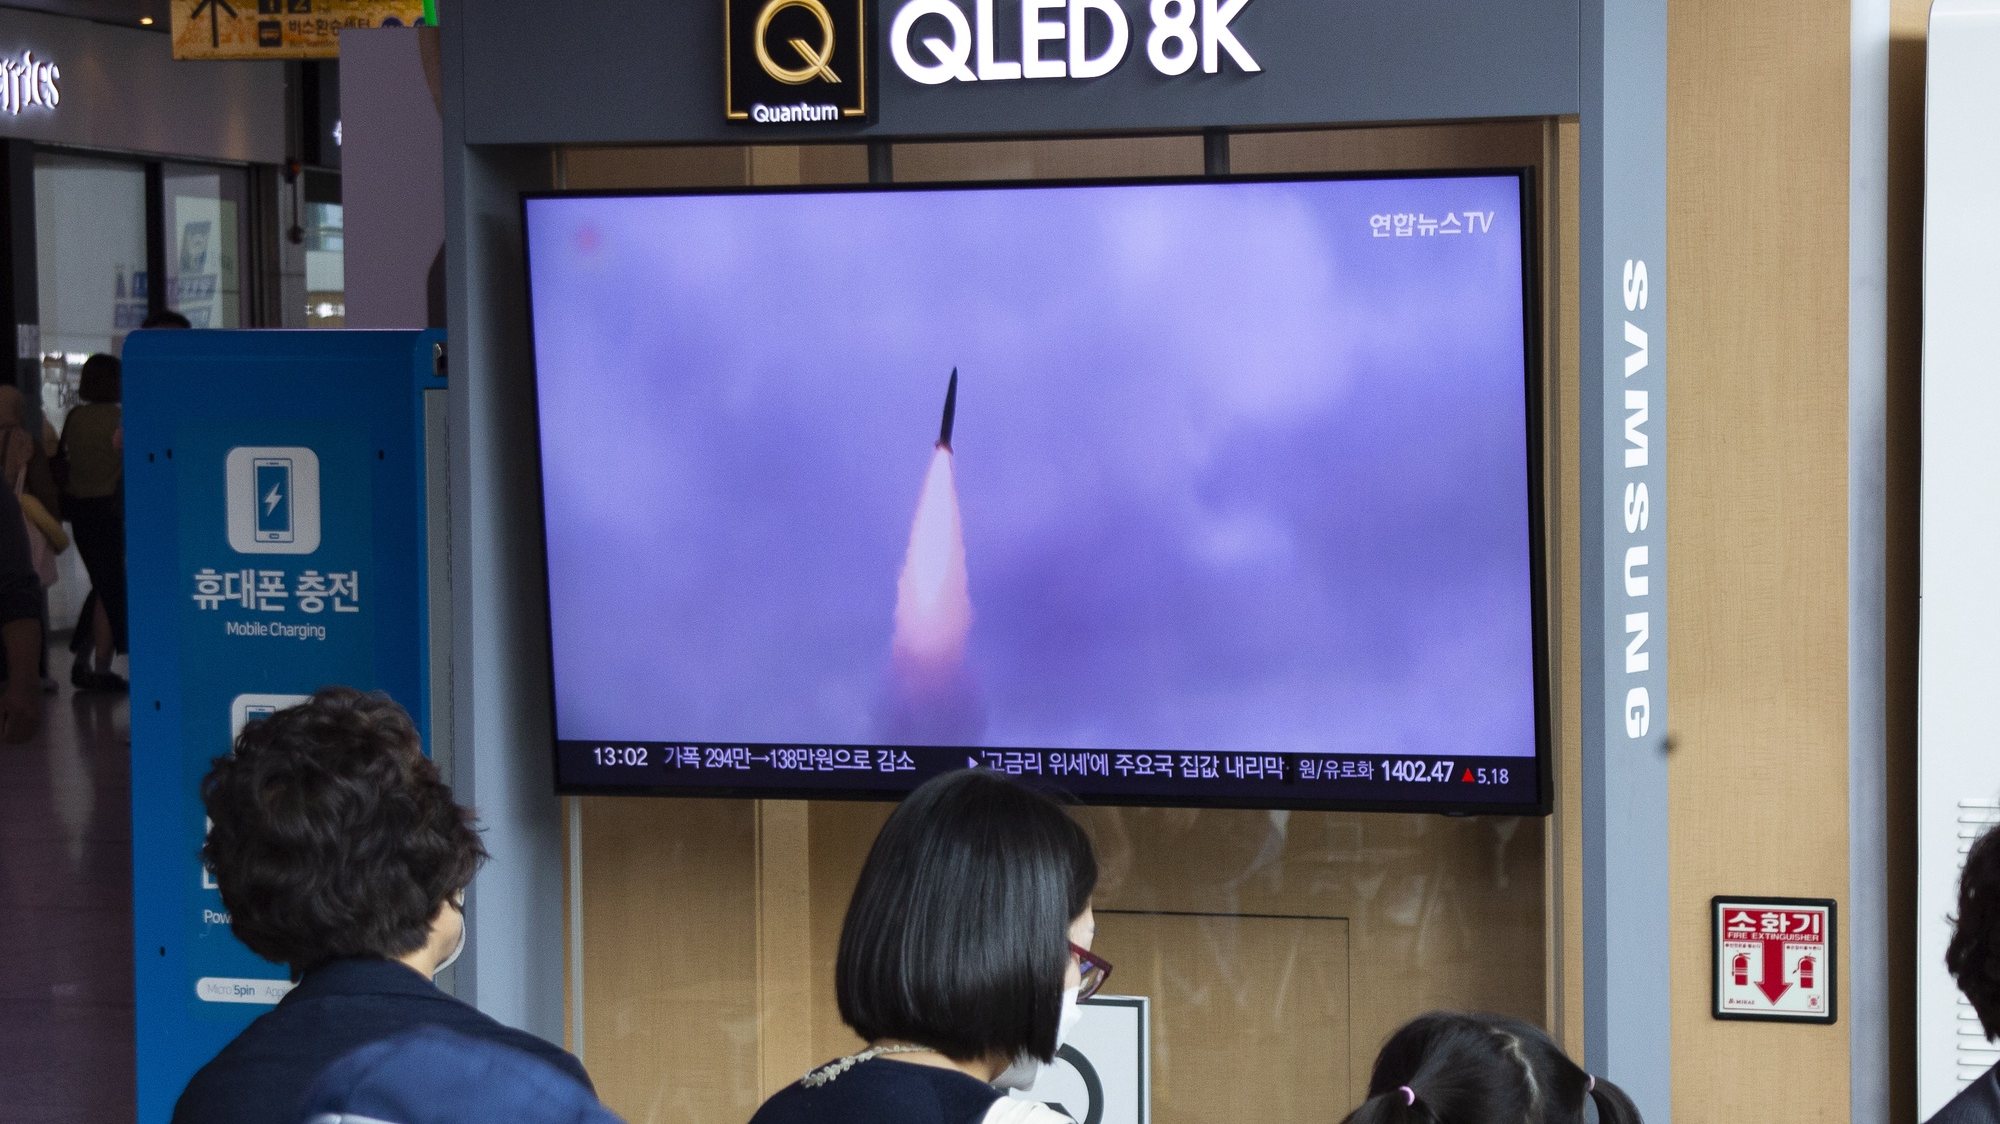 epa10214810 Commuters watch the news about a North Korea ballistic missile launch, at a station in Seoul, South Korea, 30 September 2022. According to South Korea&#039;s Joint Chiefs of Staff (JCS), Pyongyang launched two more ballistic missiles towards the East Sea on the evening of 29 September, hours after the US vice president met with South Korea&#039;s head of state in Seoul. Two more missiles were also tested on 28 September.  EPA/JEON HEON-KYUN